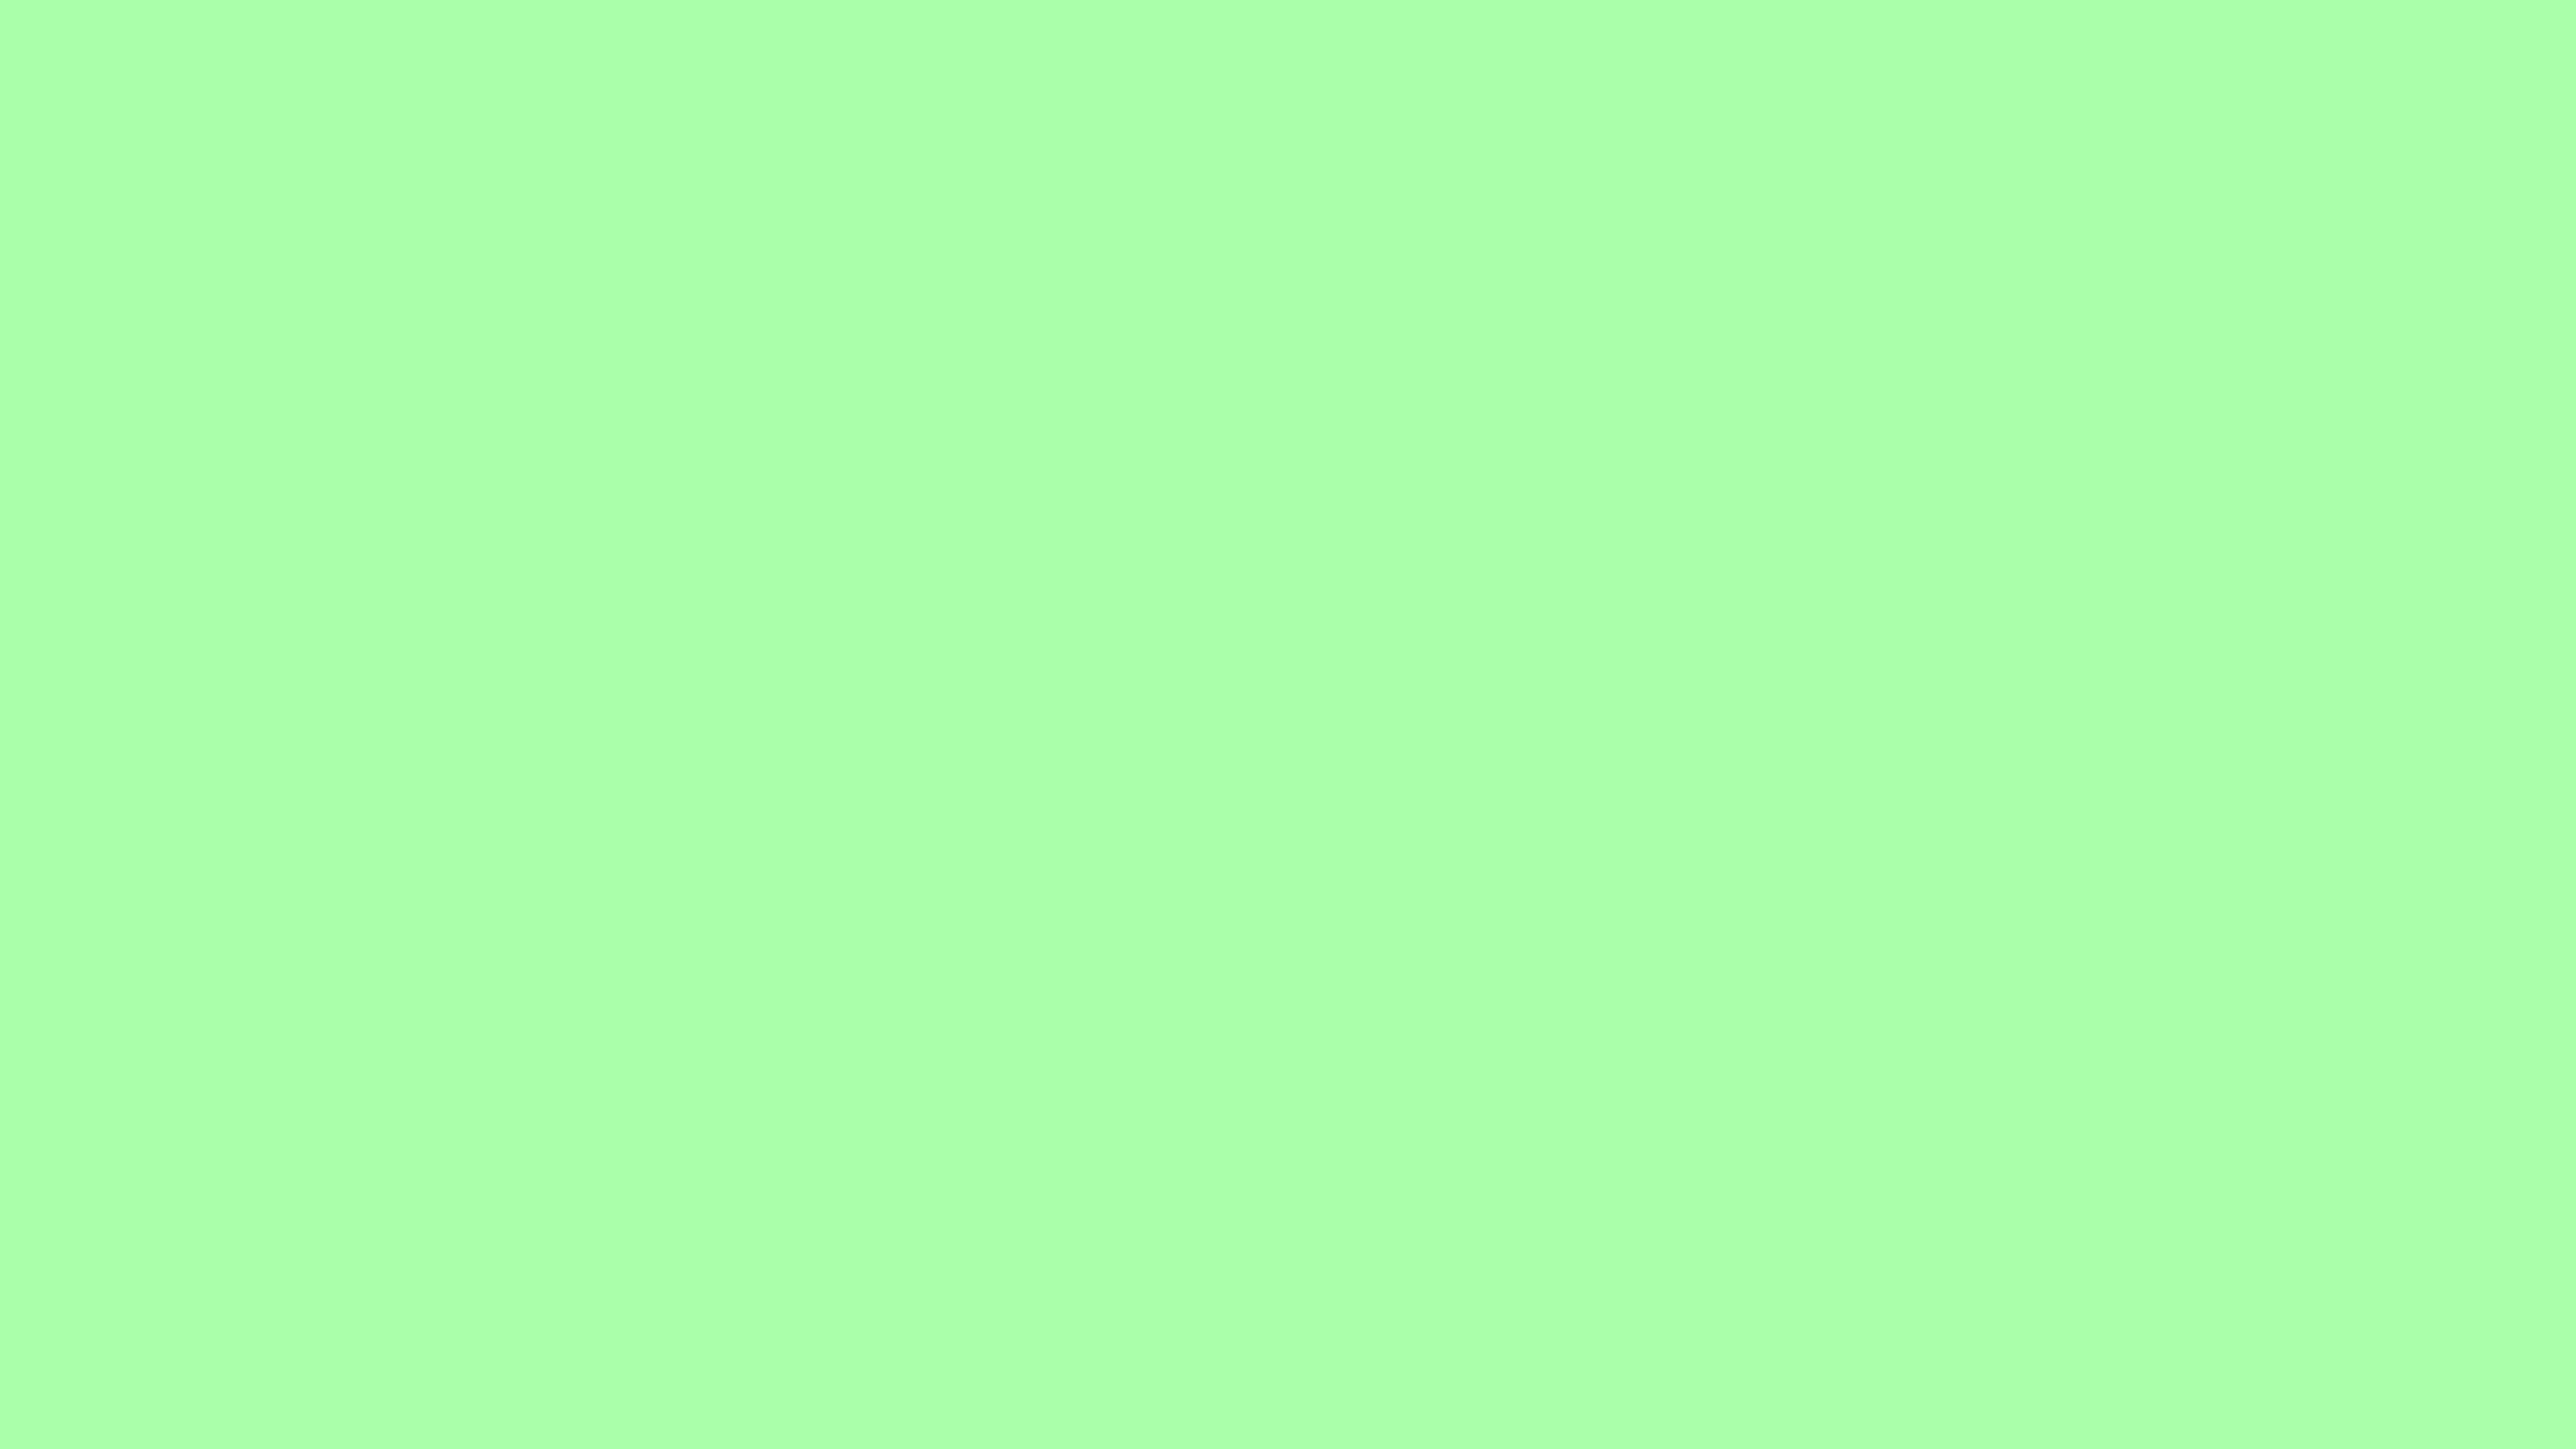 https://files.123freevectors.com/wp-content/solidbackground/creamy-mint-free-solidcolor-background.jpg